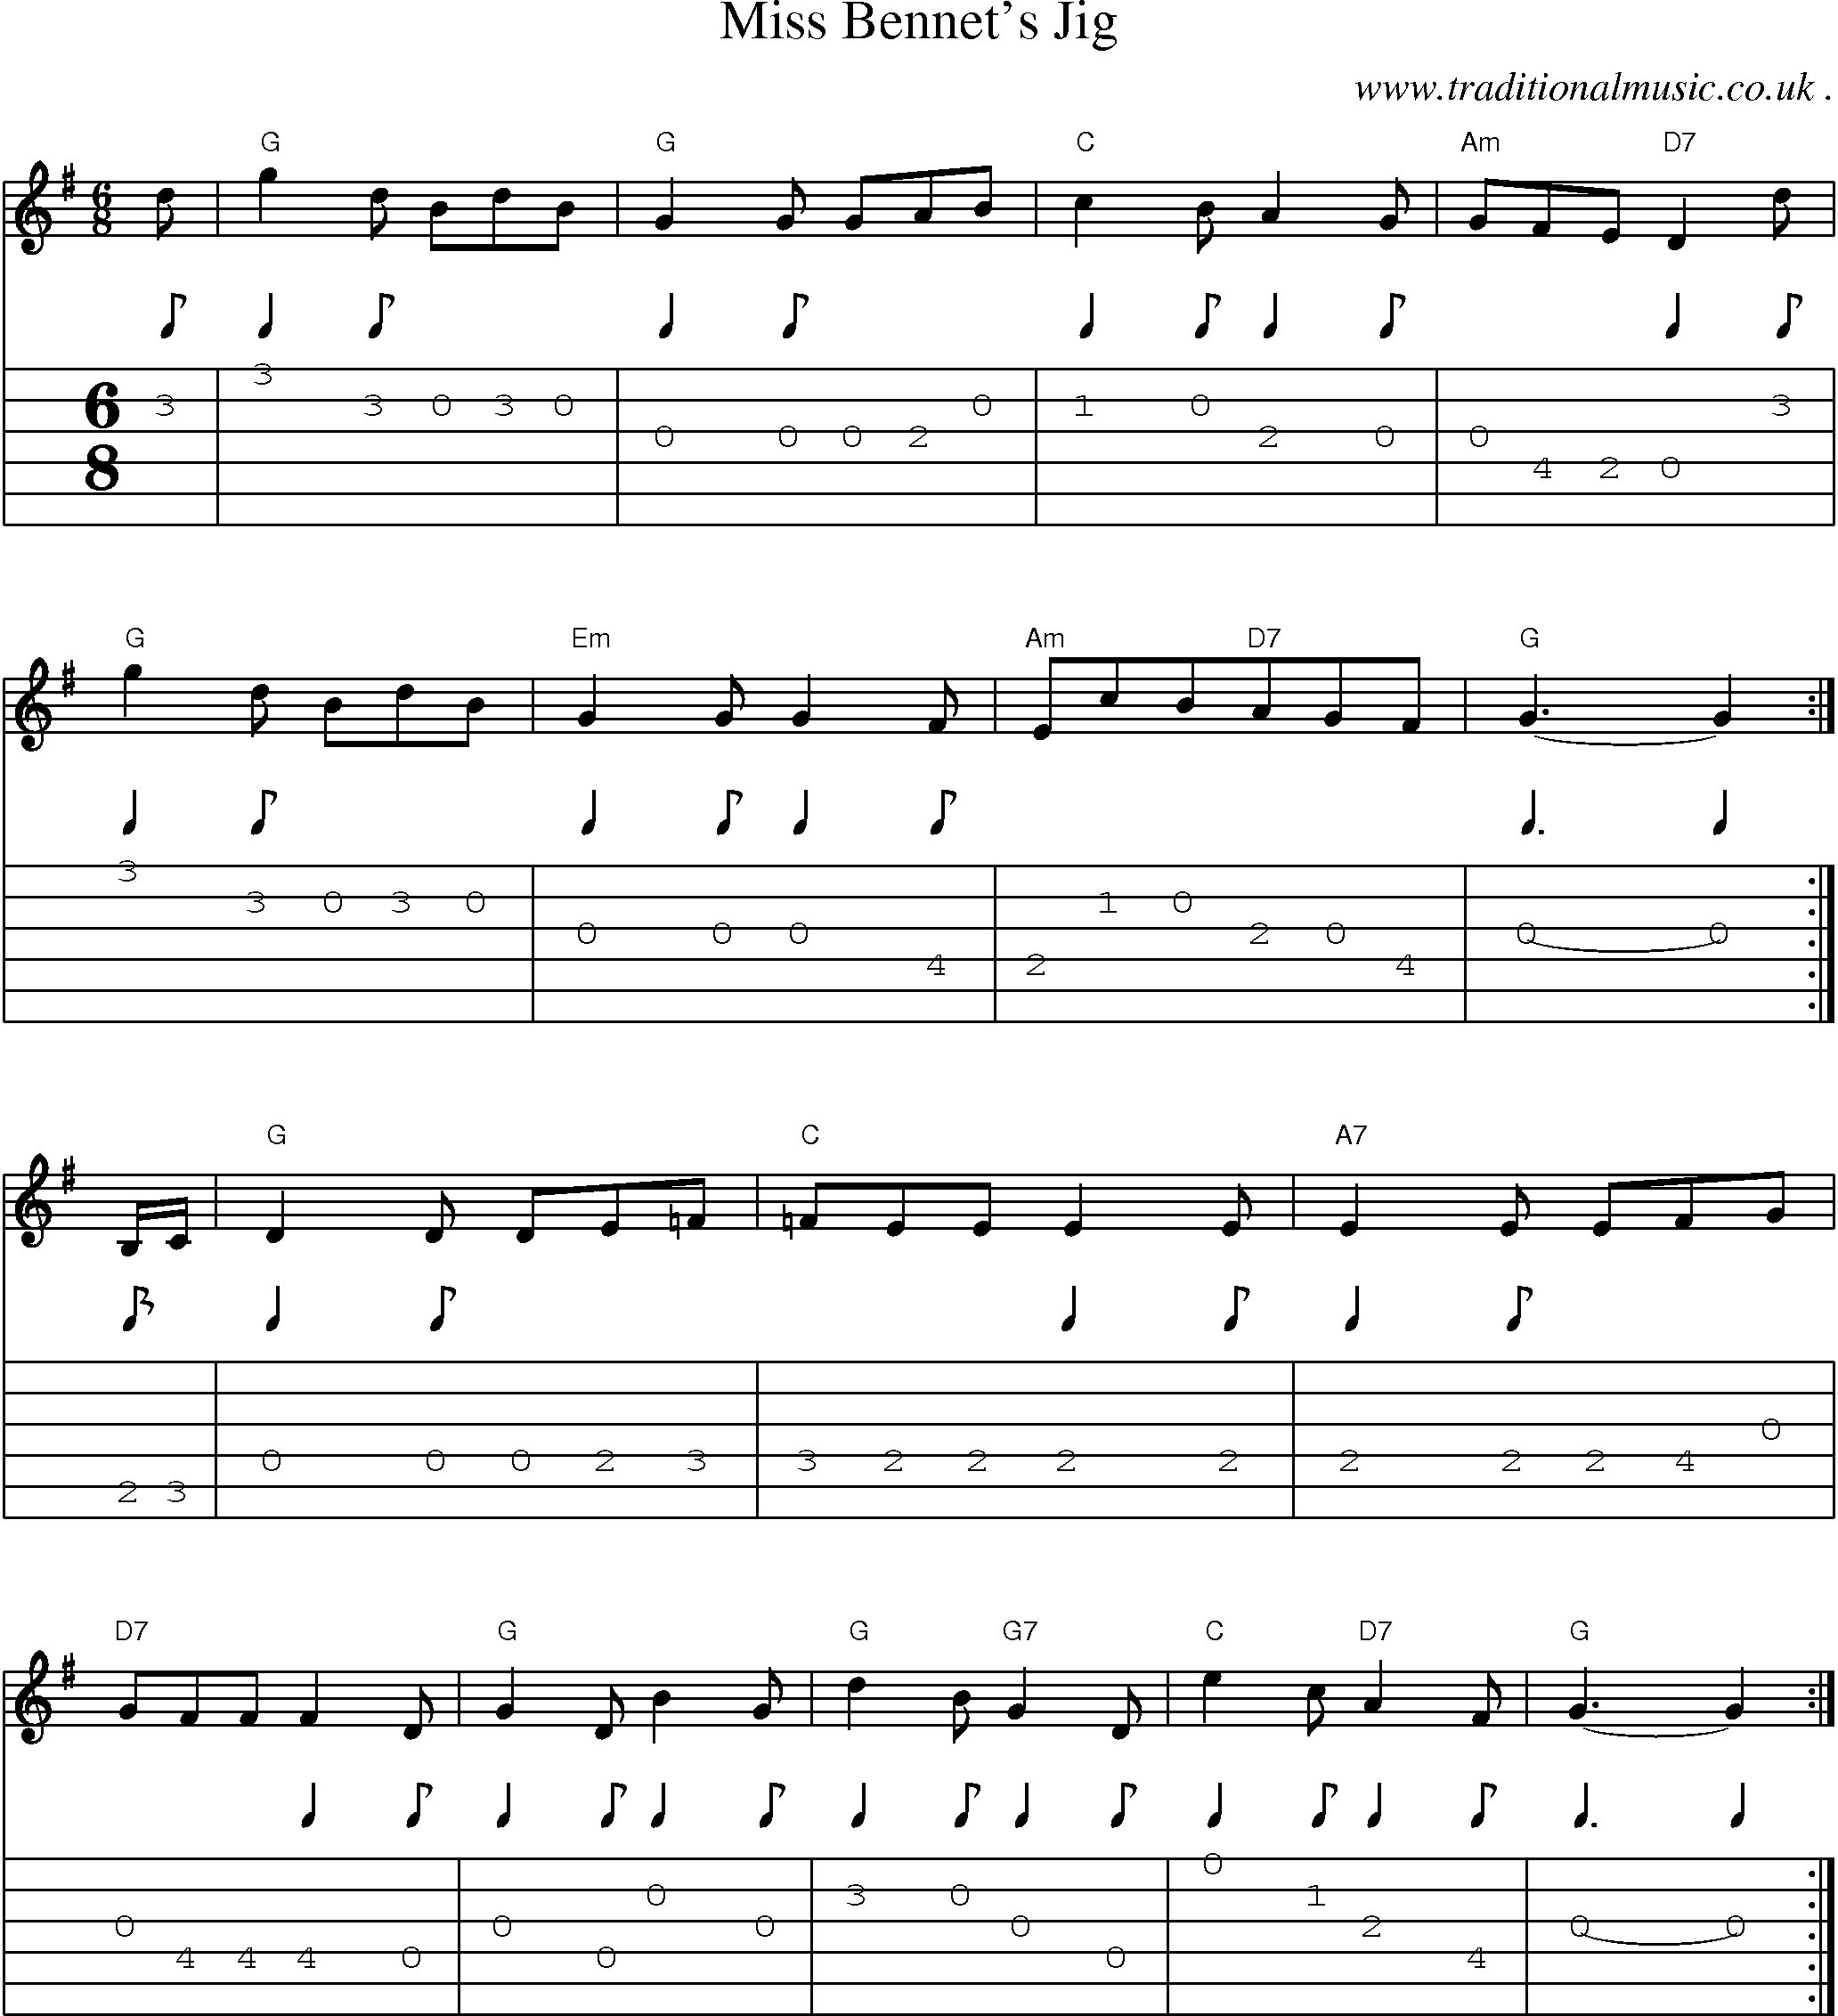 Sheet-Music and Guitar Tabs for Miss Bennets Jig